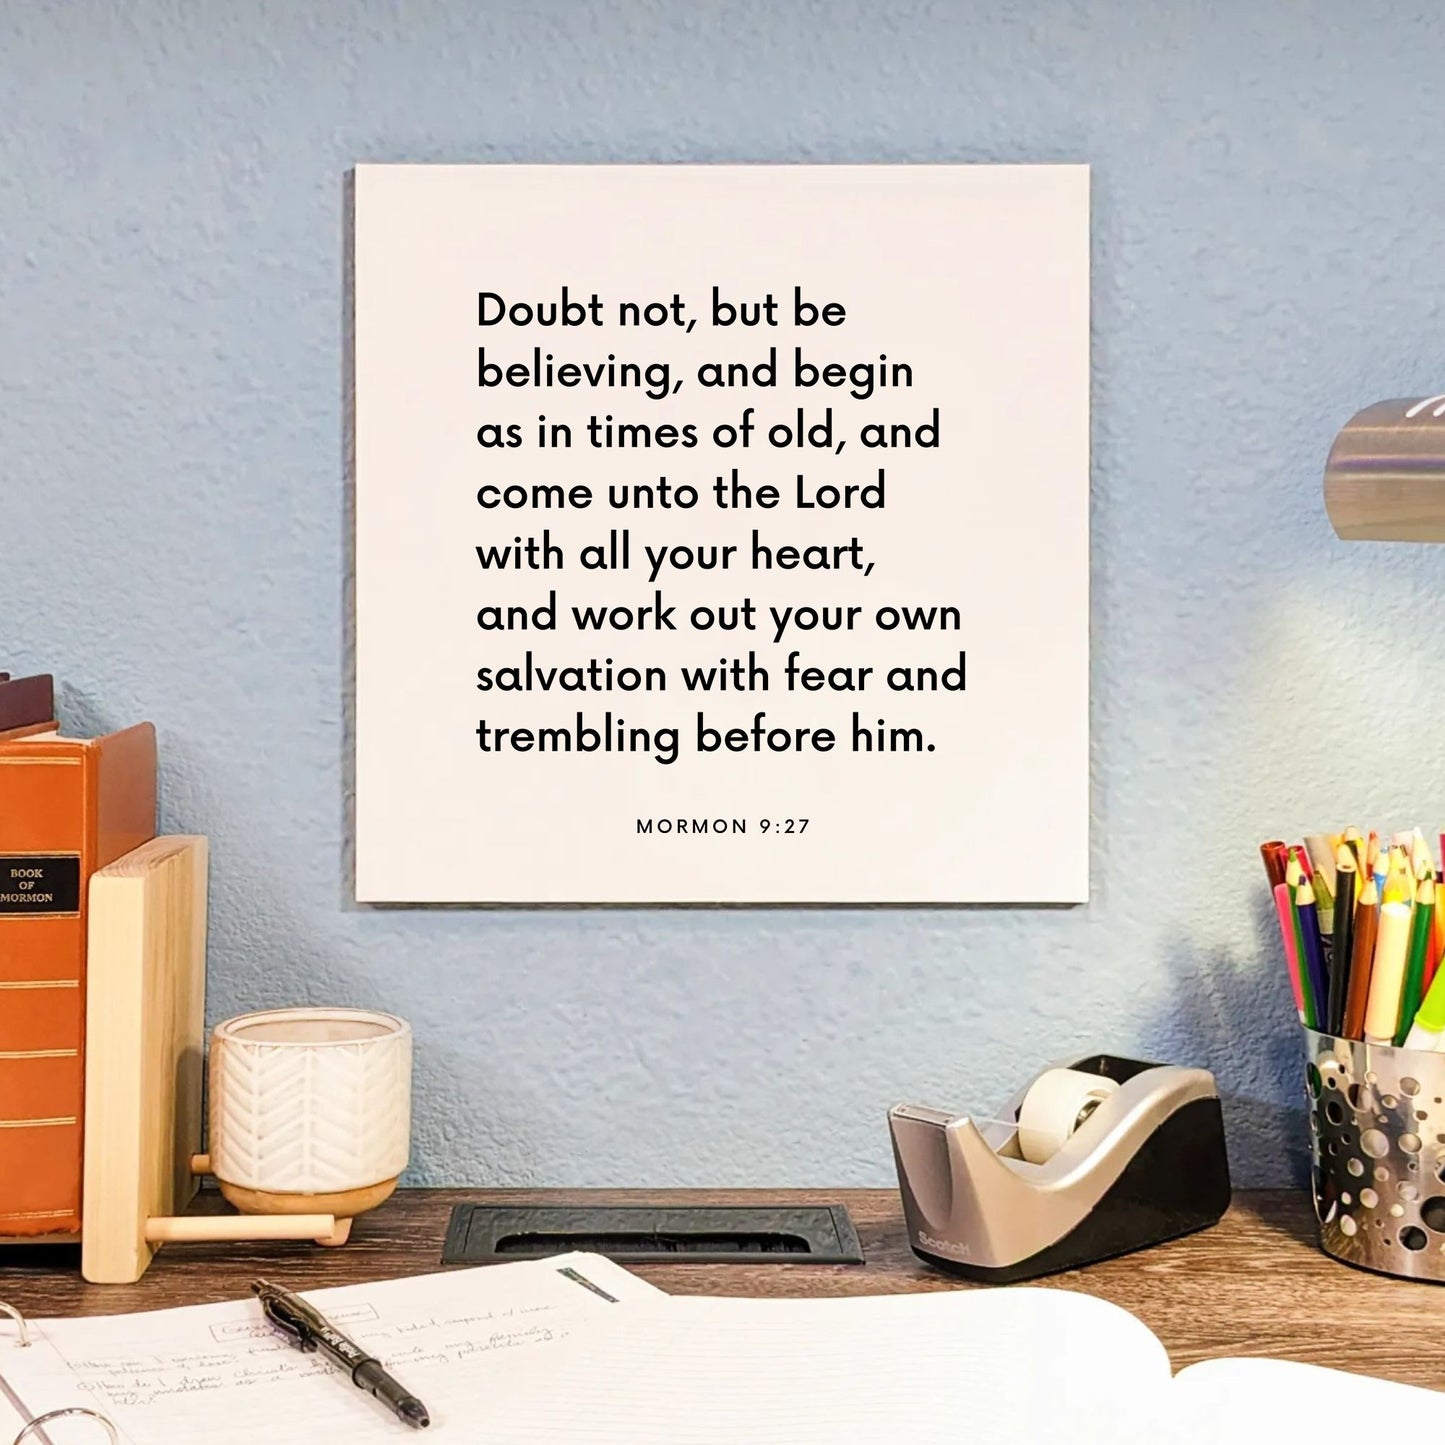 Desk mouting of the scripture tile for Mormon 9:27 - "Doubt not, but be believing"